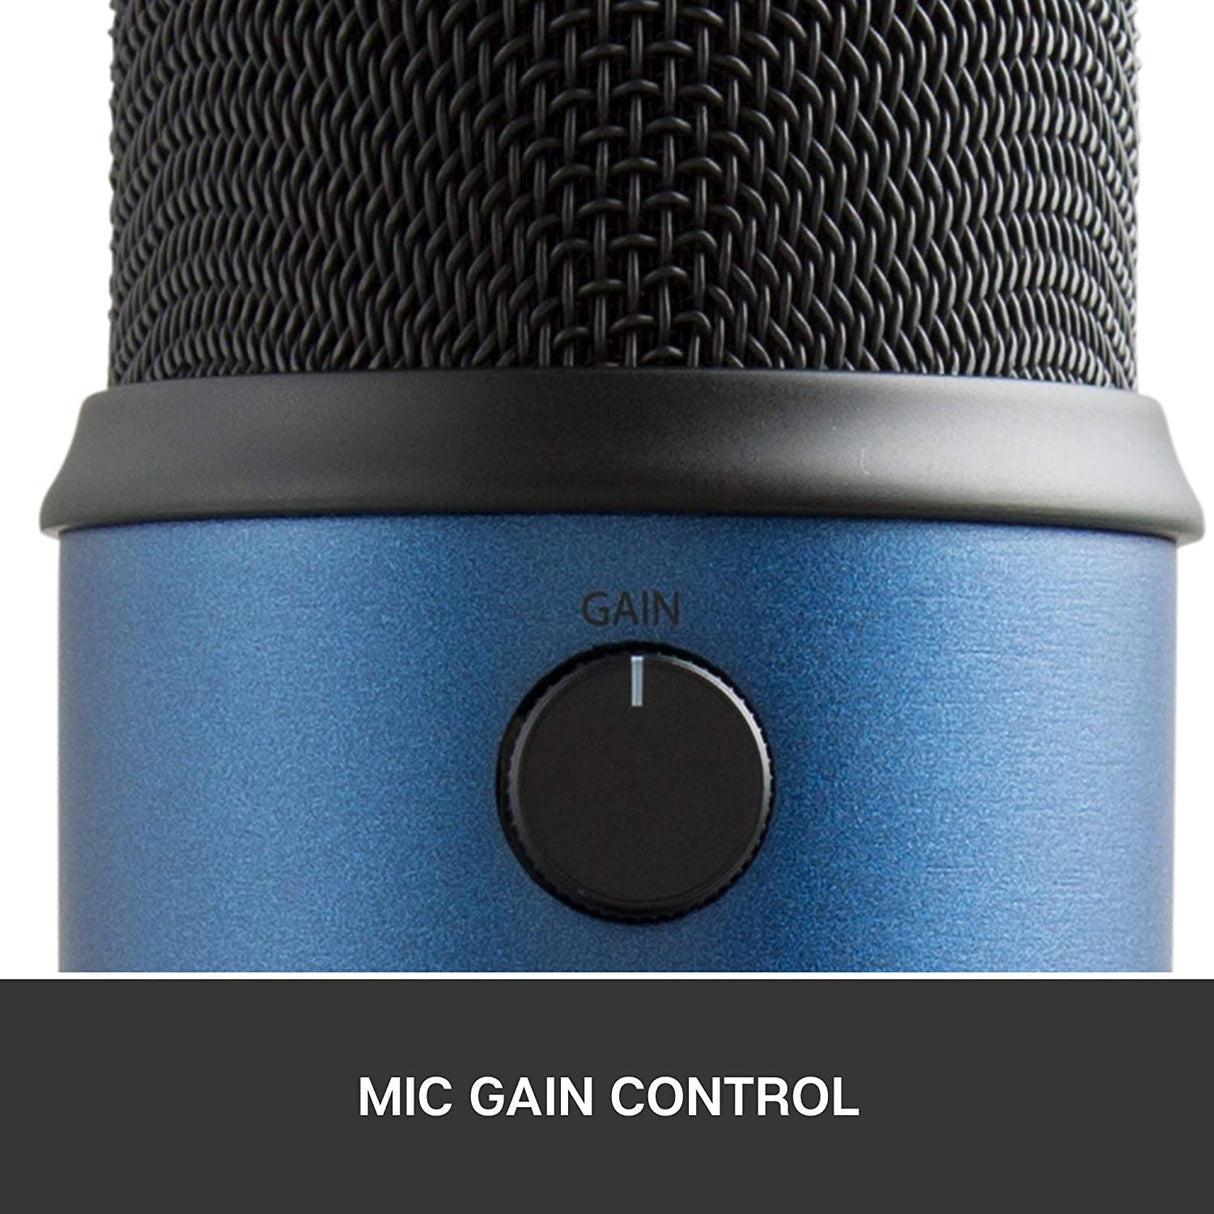 Blue microphones Blue Yeti USB Microphone for Recording, Streaming, Gaming, Podcasting on PC and Mac, Condenser Mic for Laptop or Computer with Blue VO!CE Effects, Adjustable Stand, Plug and Play – Midnight Blue